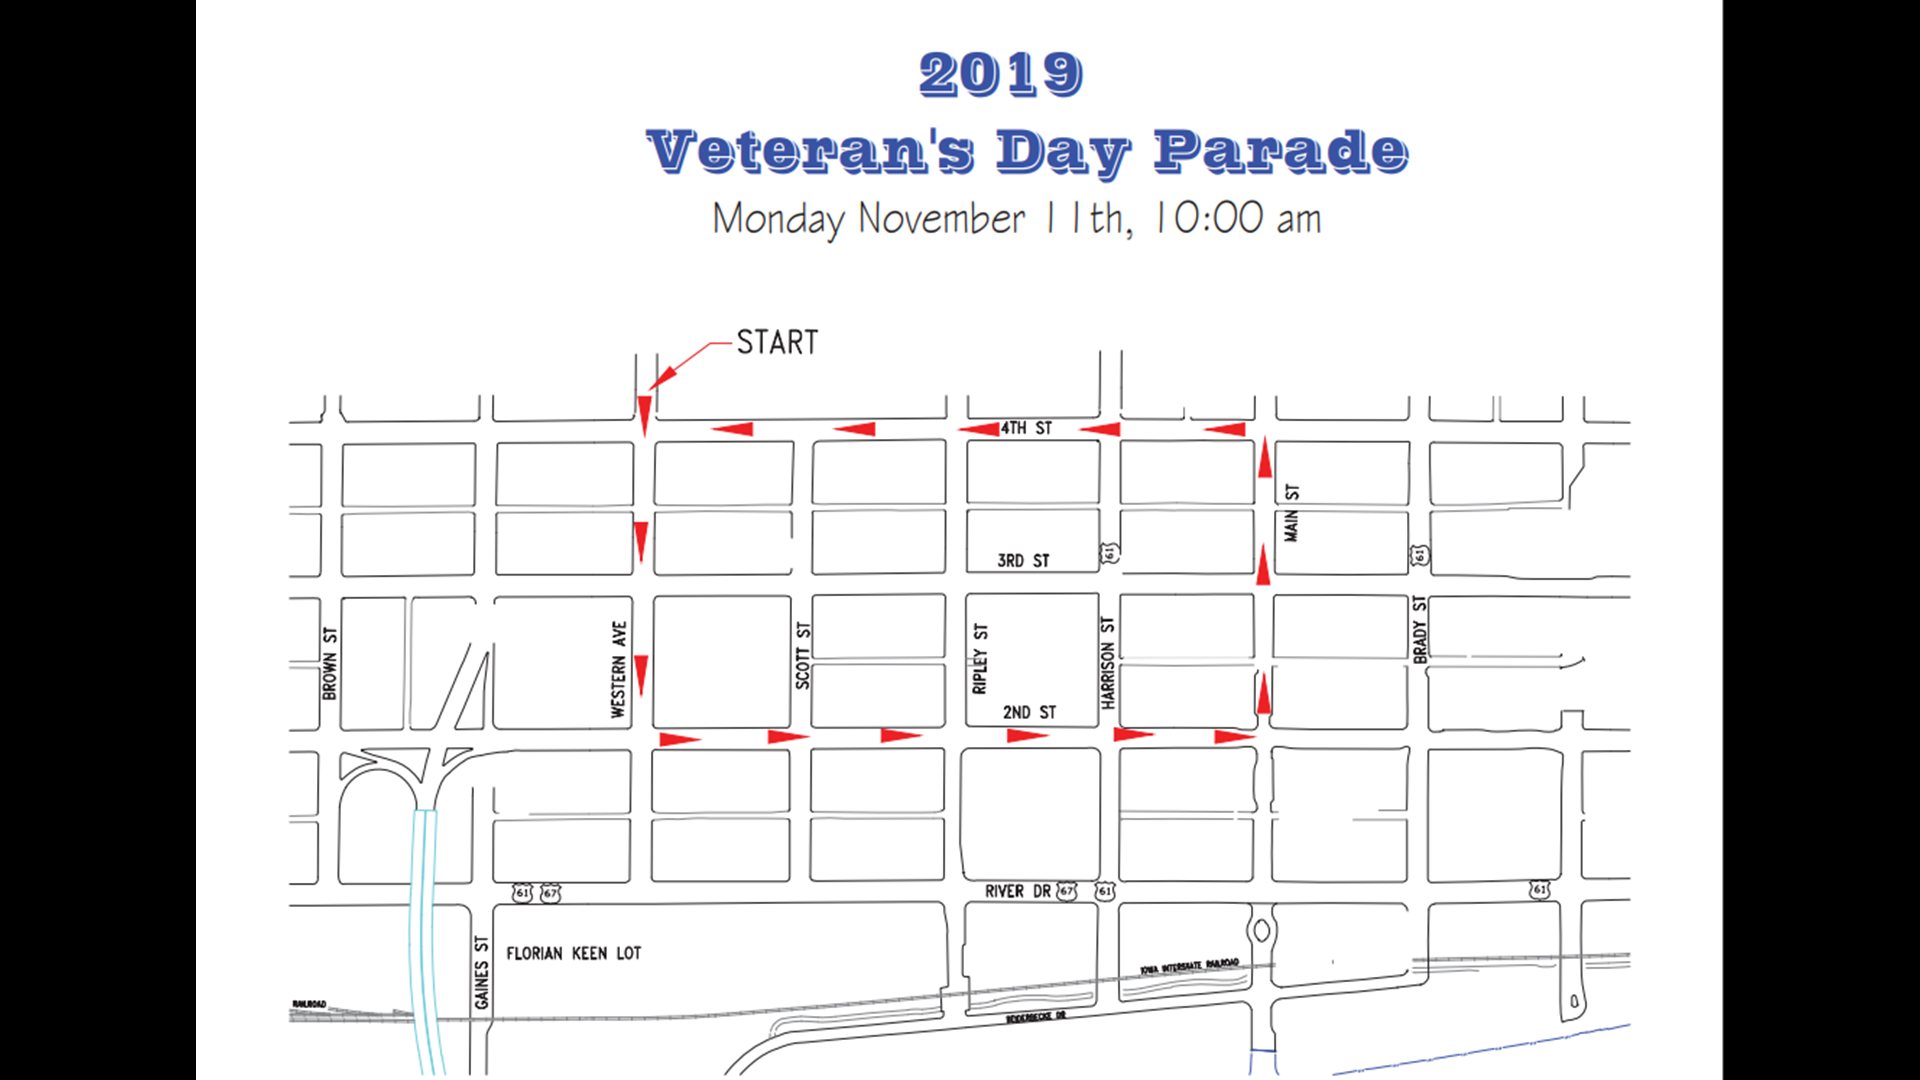 Here’s what roads are closed for the Davenport Veterans Day parade